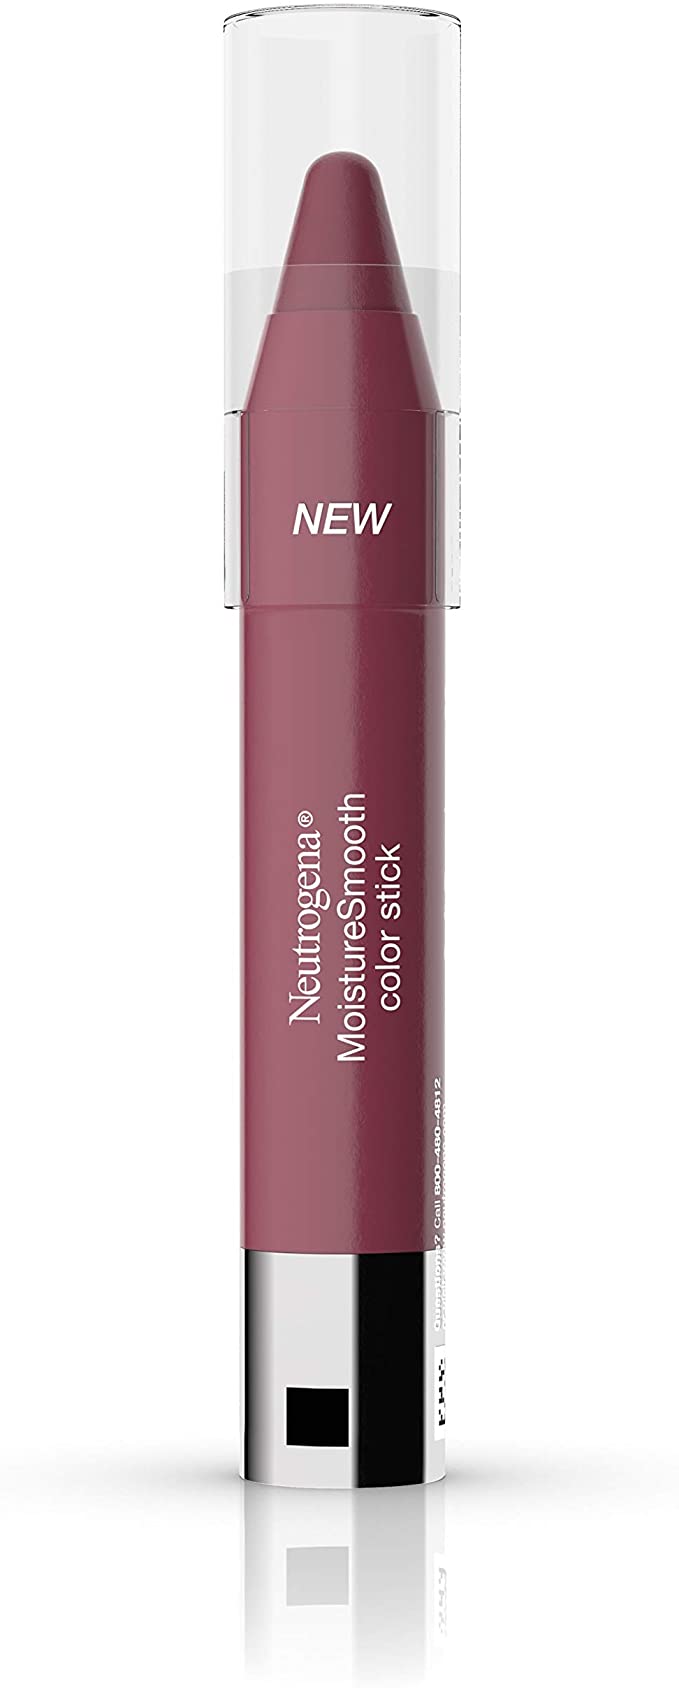 Neutrogena Moisture Smooth Color Stick for Lips, Moisturizing and Conditioning Lipstick with a Balm-Like Formula, Nourishing Shea Butter and Fruit Extract